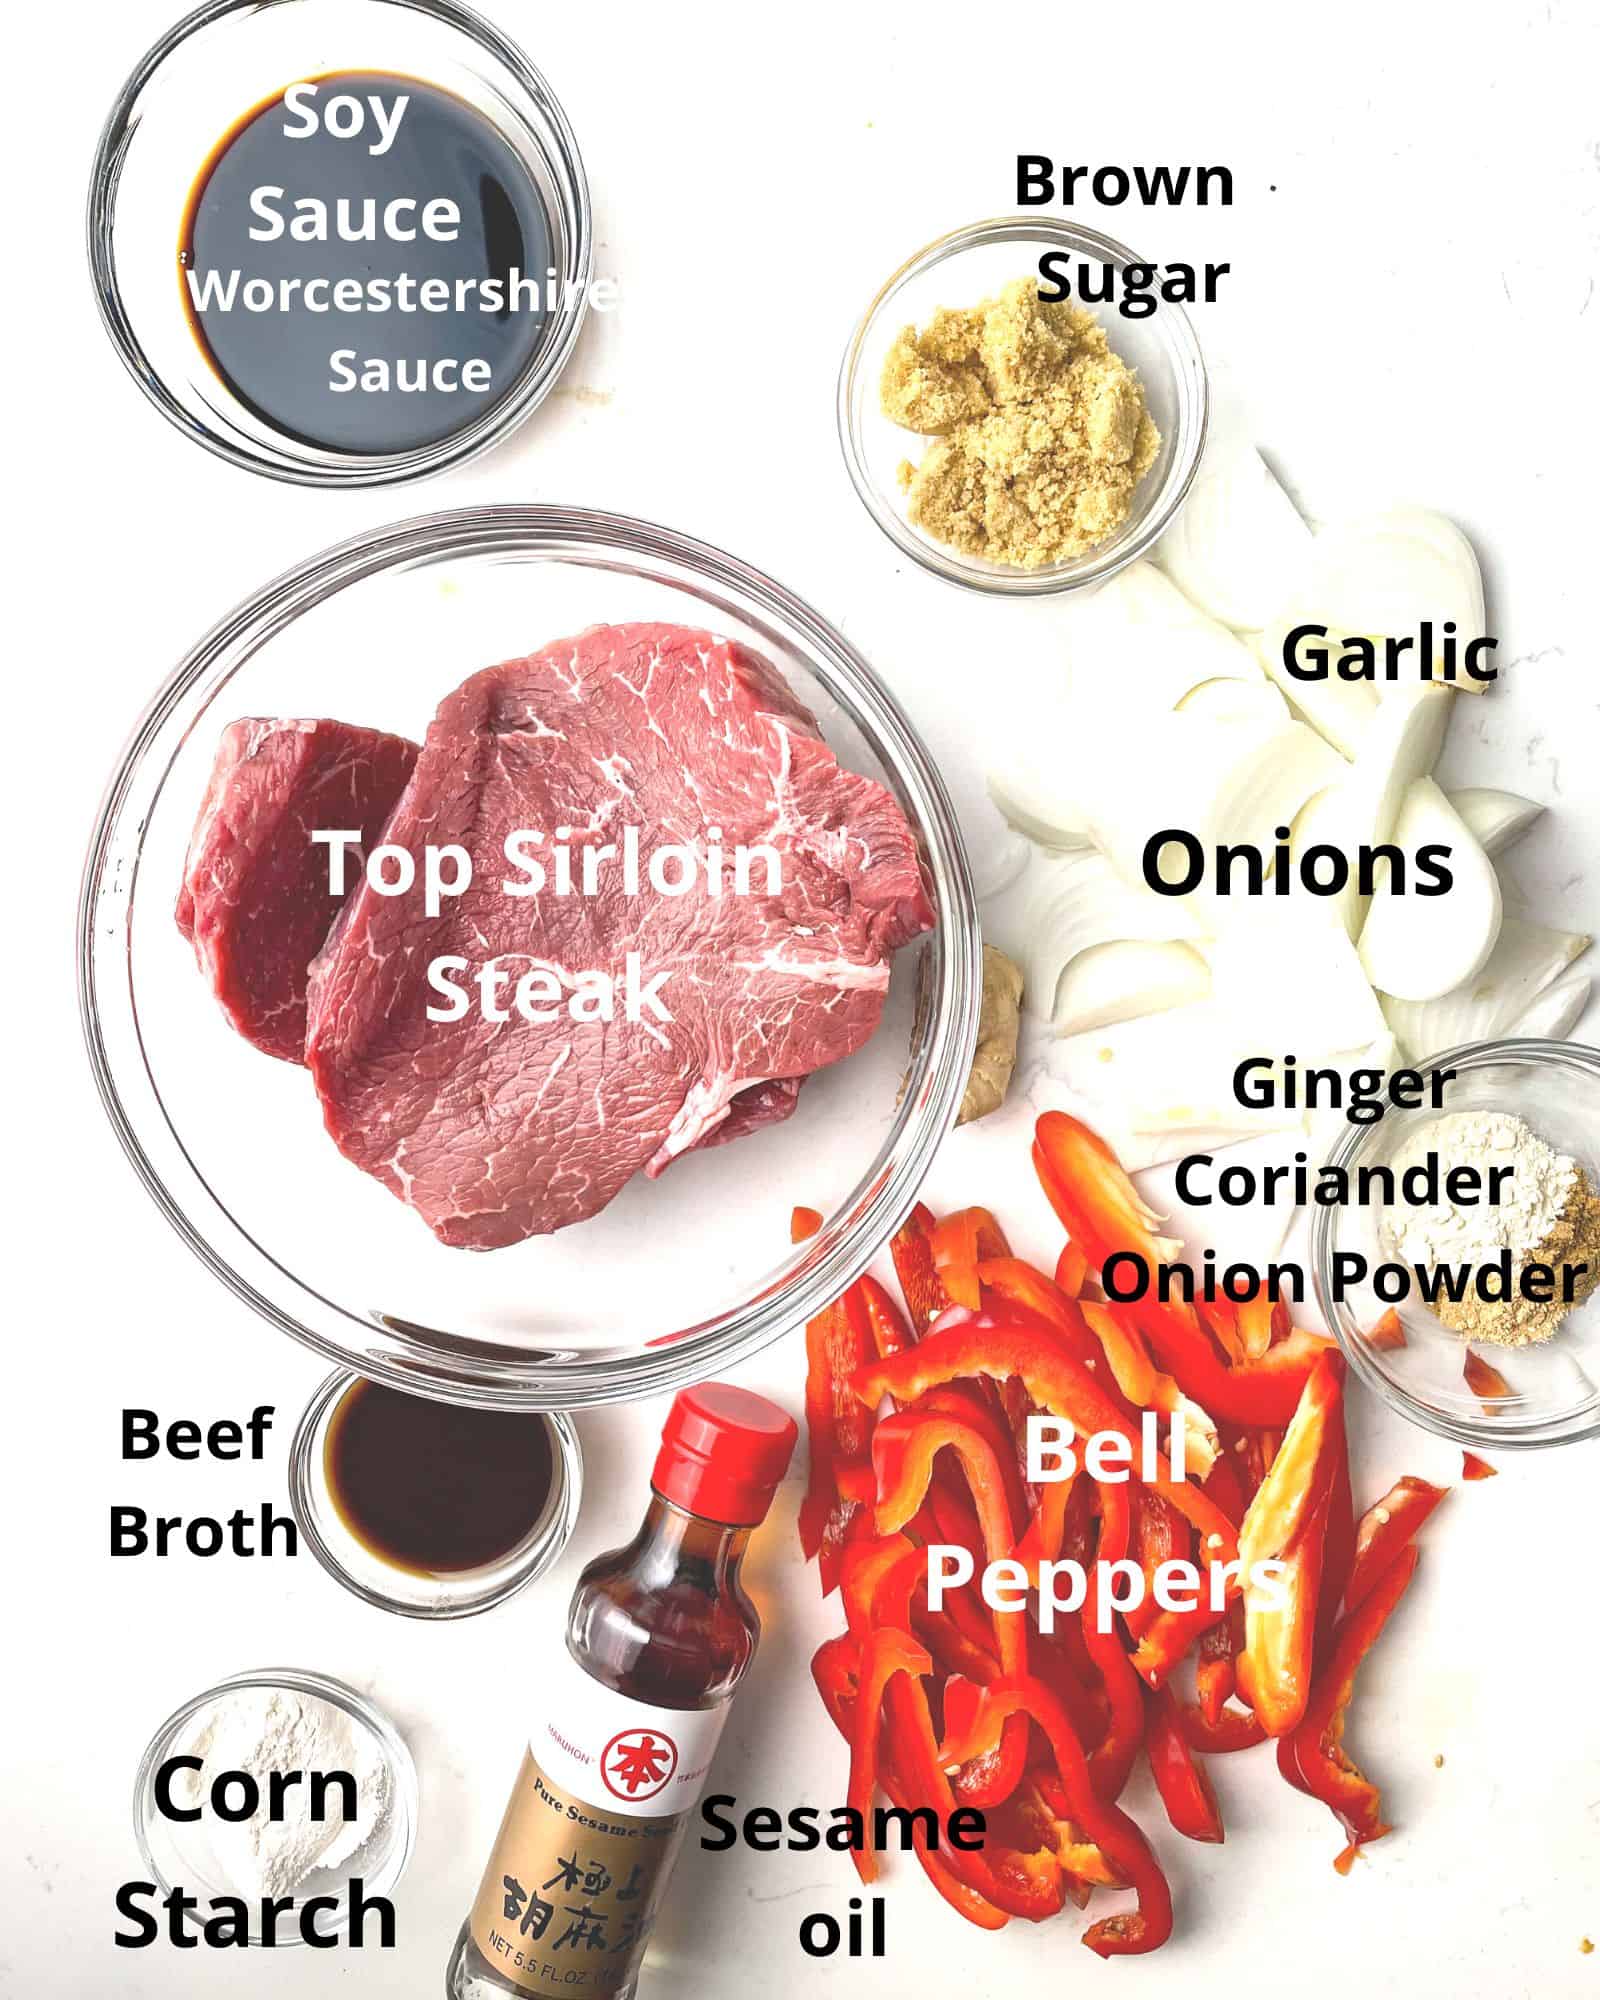 ingredients to make pepper steak - sirloin steak, soy sauce, onions, garlic, bell peppers, worcestershire sauce, brown sugar, sesame oil, corn starch, and beef broth.